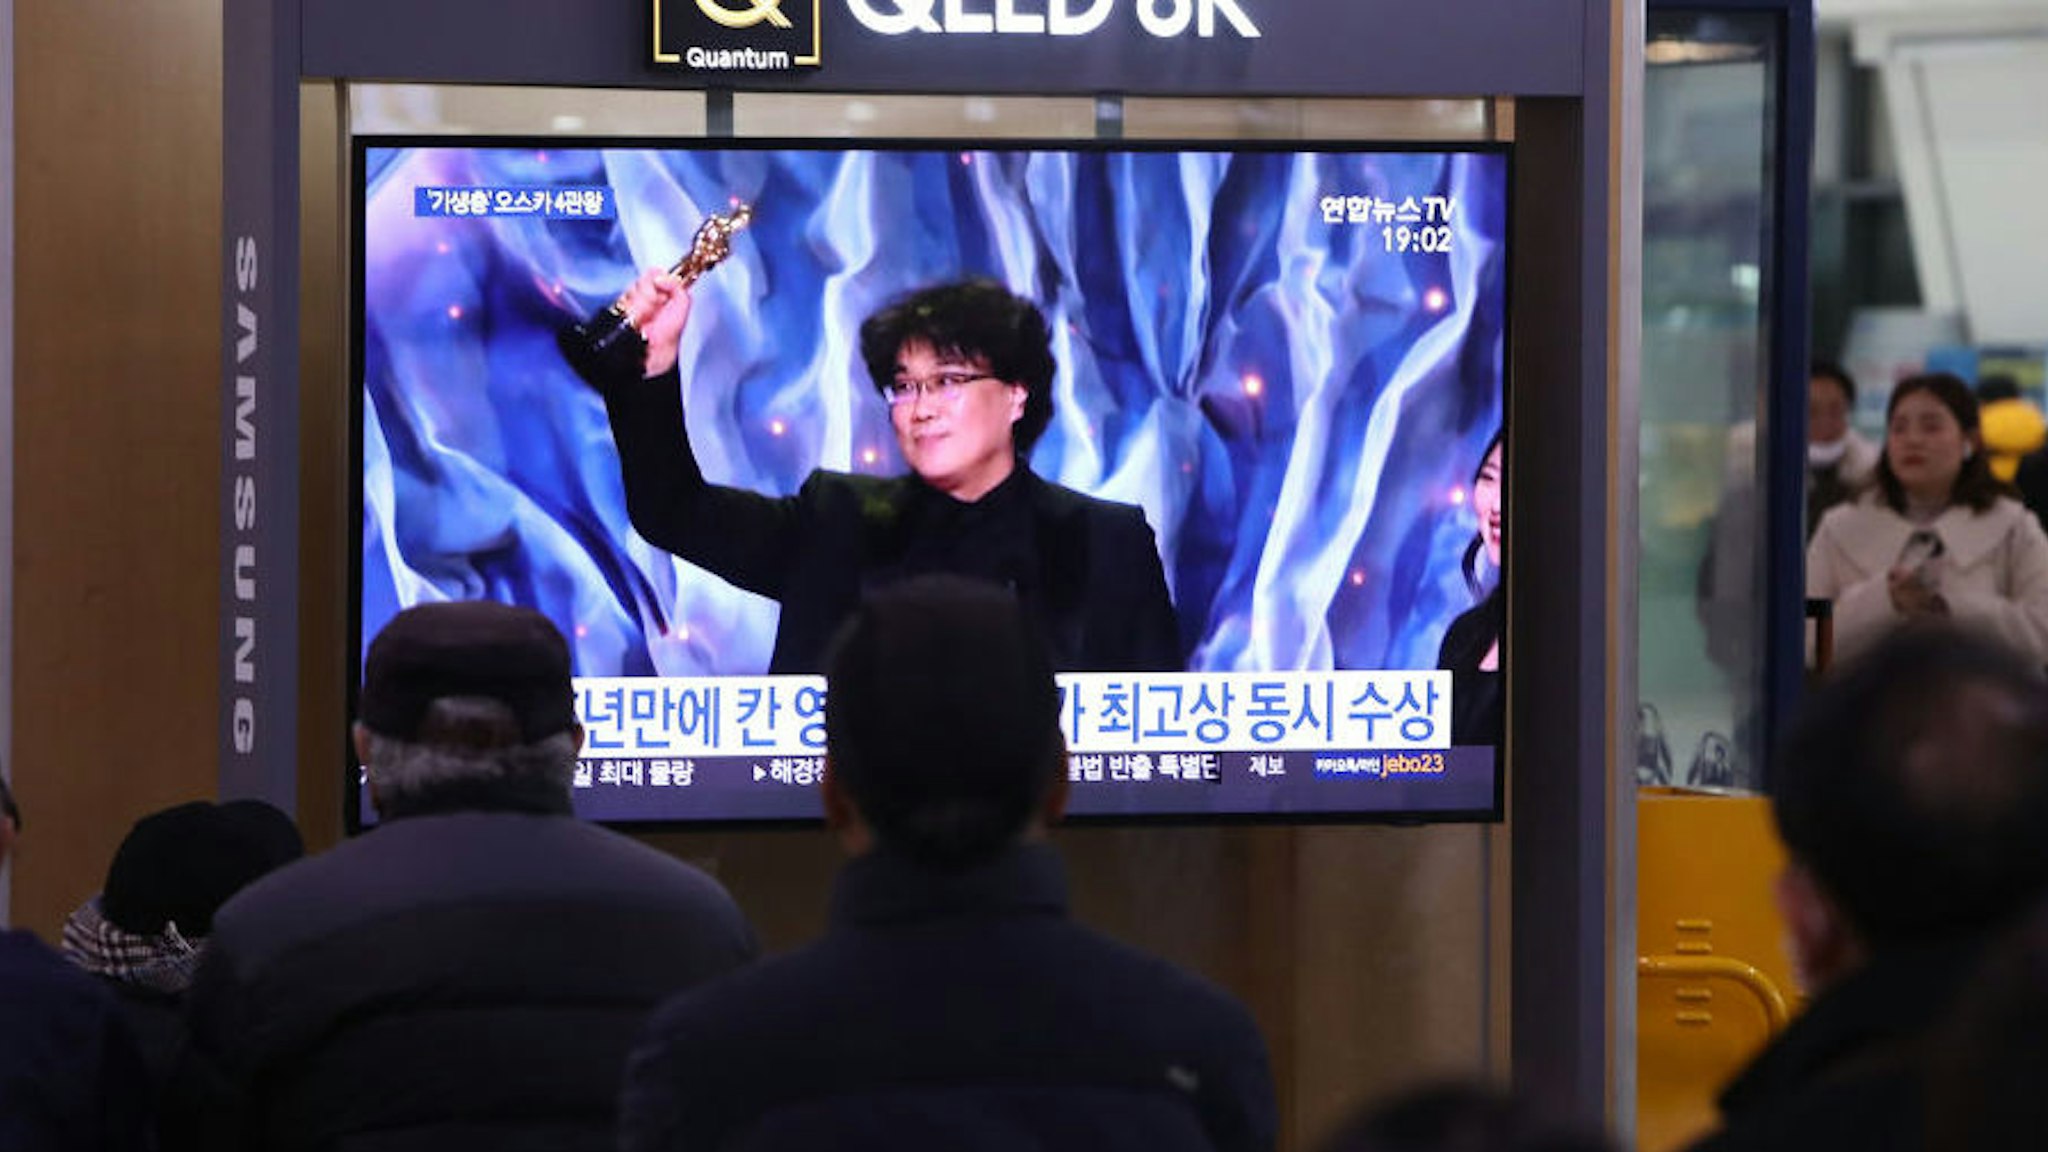 People watch a TV screen showing images of South Korean director Bong Joon Ho at the Seoul Railway Station on February 10, 2020 in Seoul, South Korea. Bong Joon-ho's "Parasite" has bagged four Oscar titles, becoming the first non-English language film to win best picture. (Photo by Chung Sung-Jun/Getty Images)